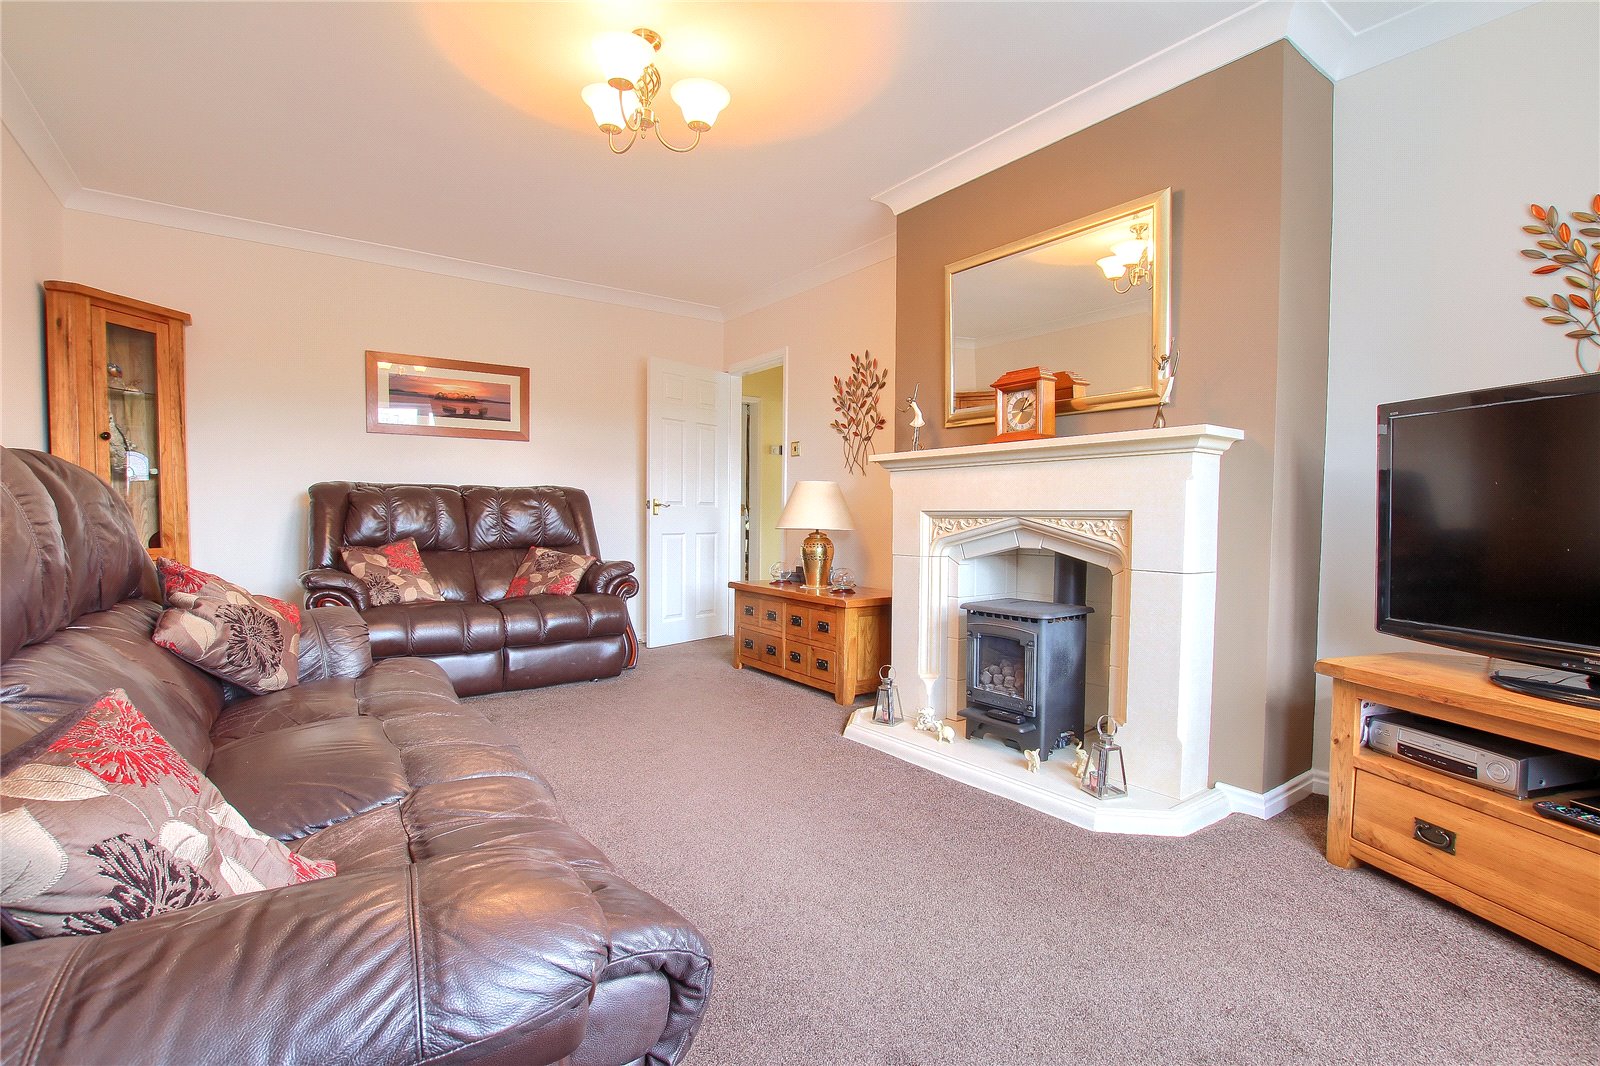 2 bed bungalow for sale in Bede Close, Stockton-on-Tees  - Property Image 2